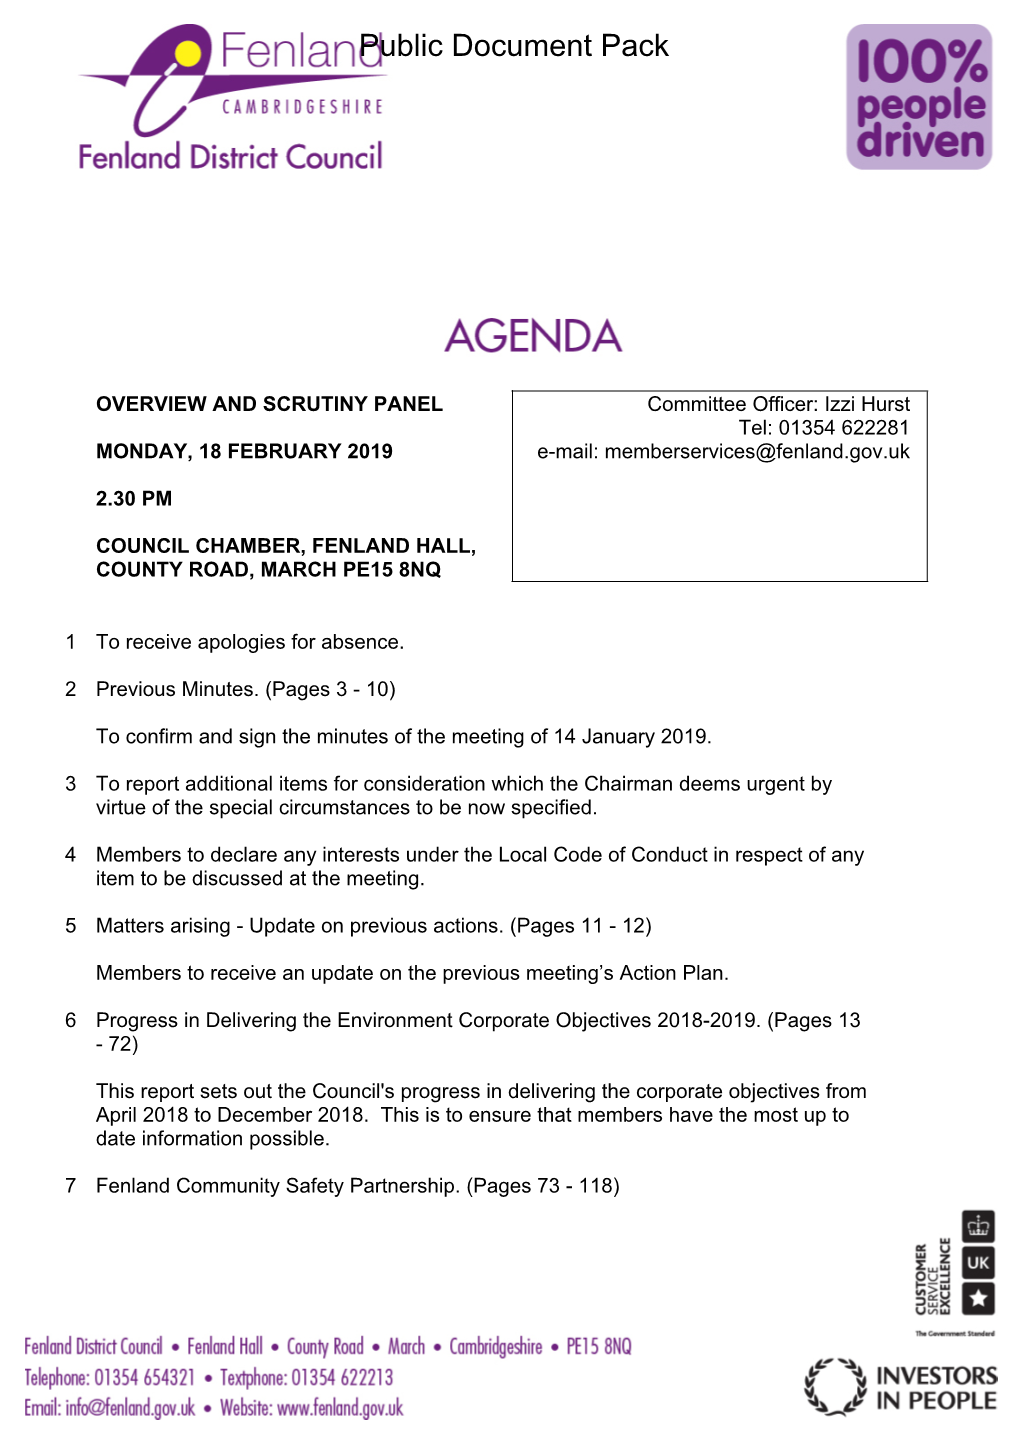 Agenda Document for Overview and Scrutiny Panel, 18/02/2019 14:30